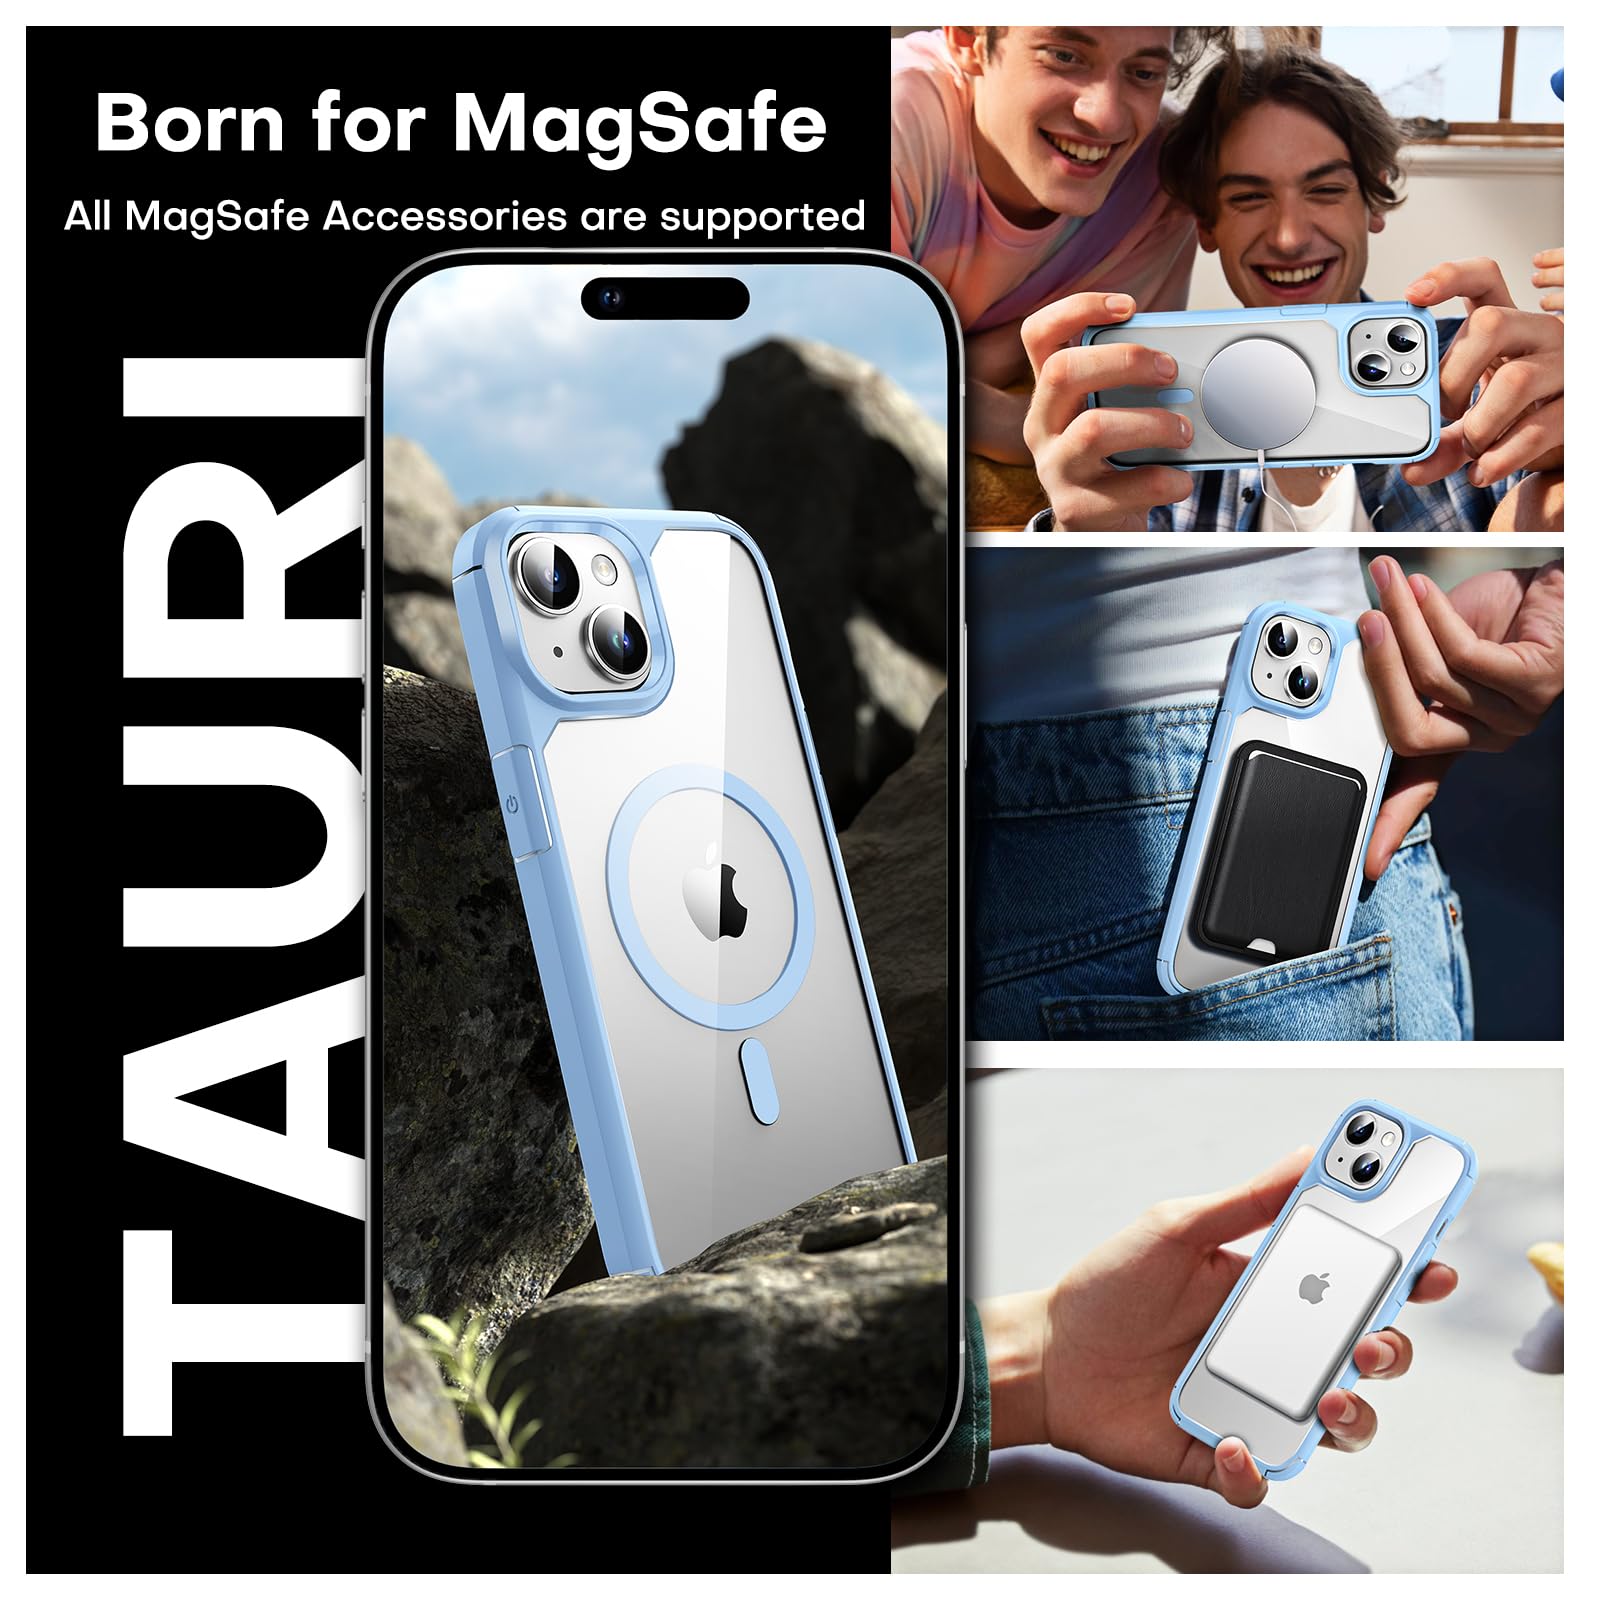 TAURI 5 in 1 Magnetic Case for iPhone 15 Plus [Military Grade Drop Protection] with 2X Screen Protector +2X Camera Lens Protector, Transparent Slim Fit Designed for Mag-Safe Case-Light Blue